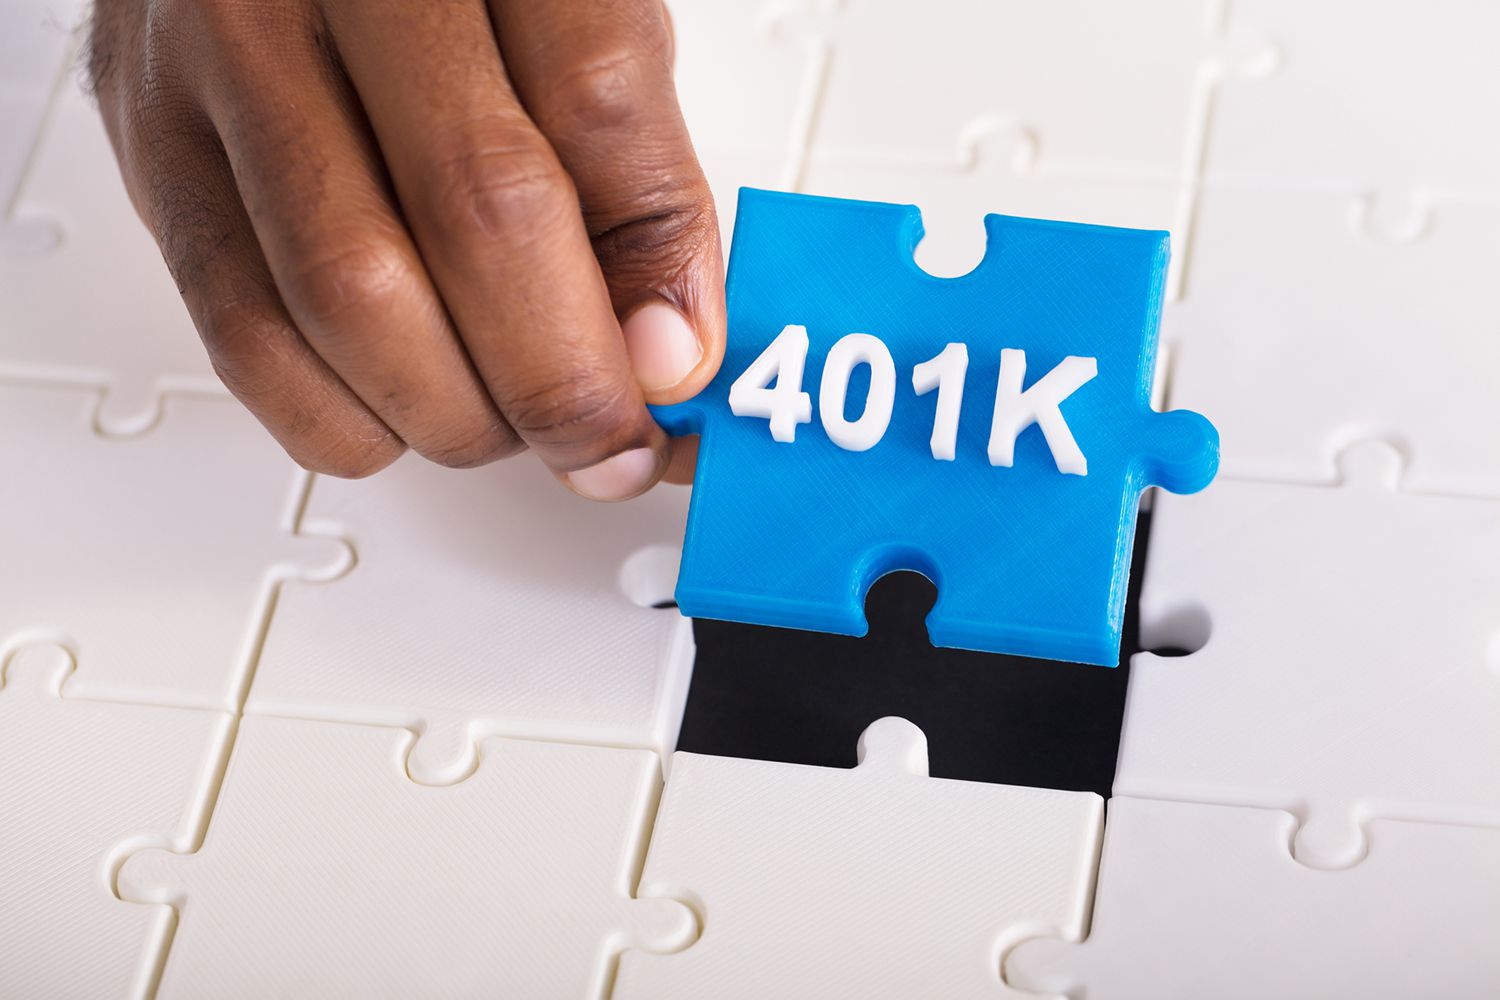 How To Transfer Your 401k To Another Company ...